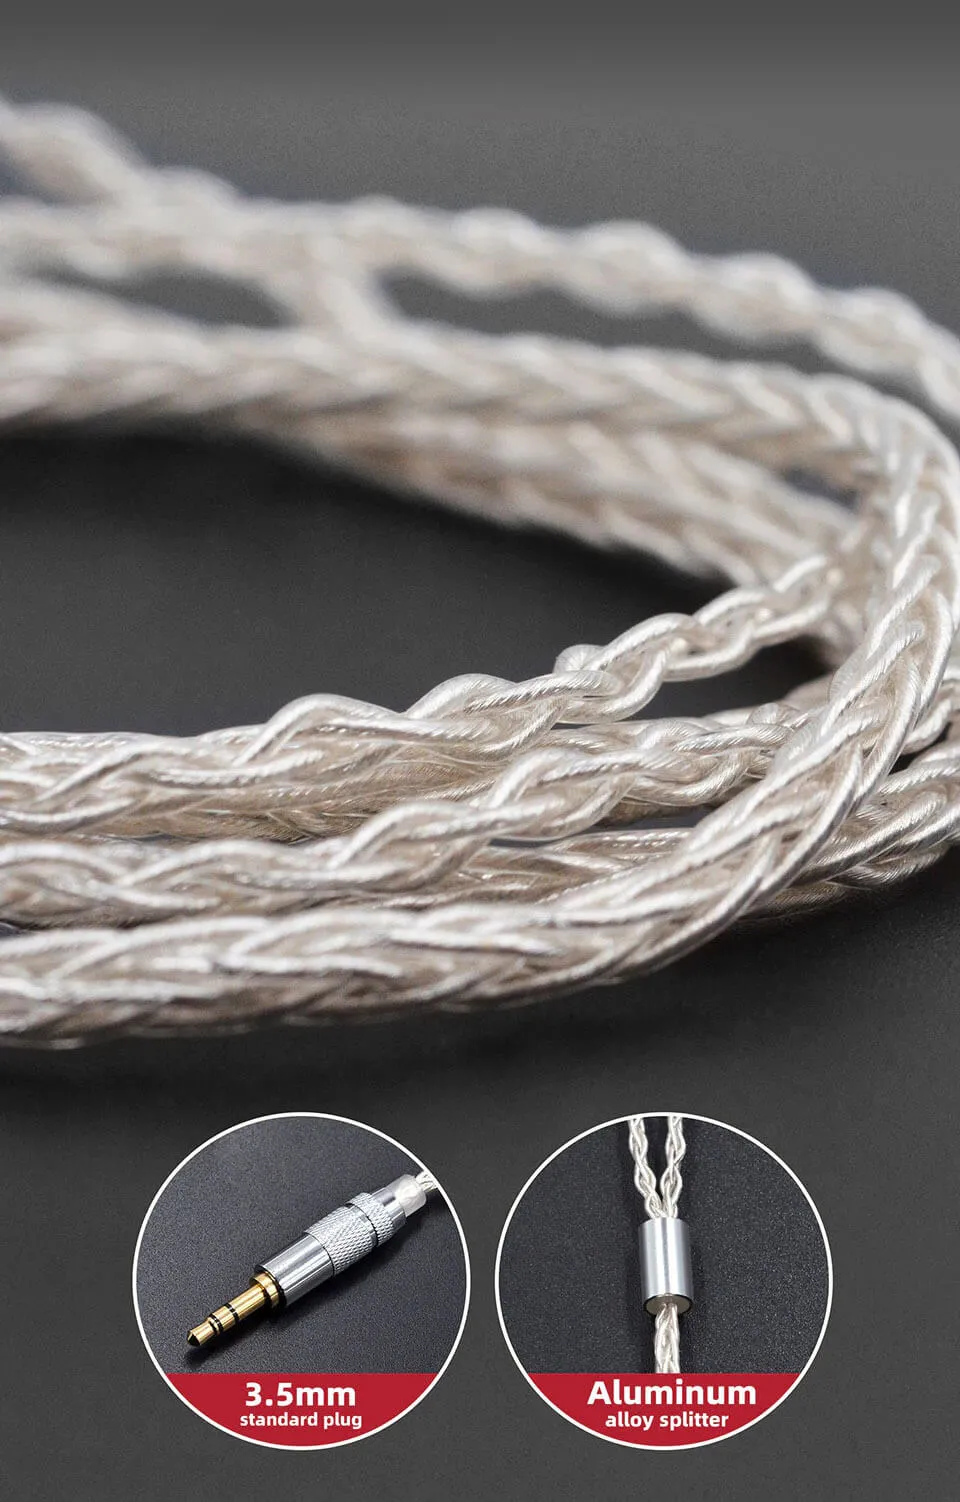 Standard 8-strand braided silver-plated upgrade cable